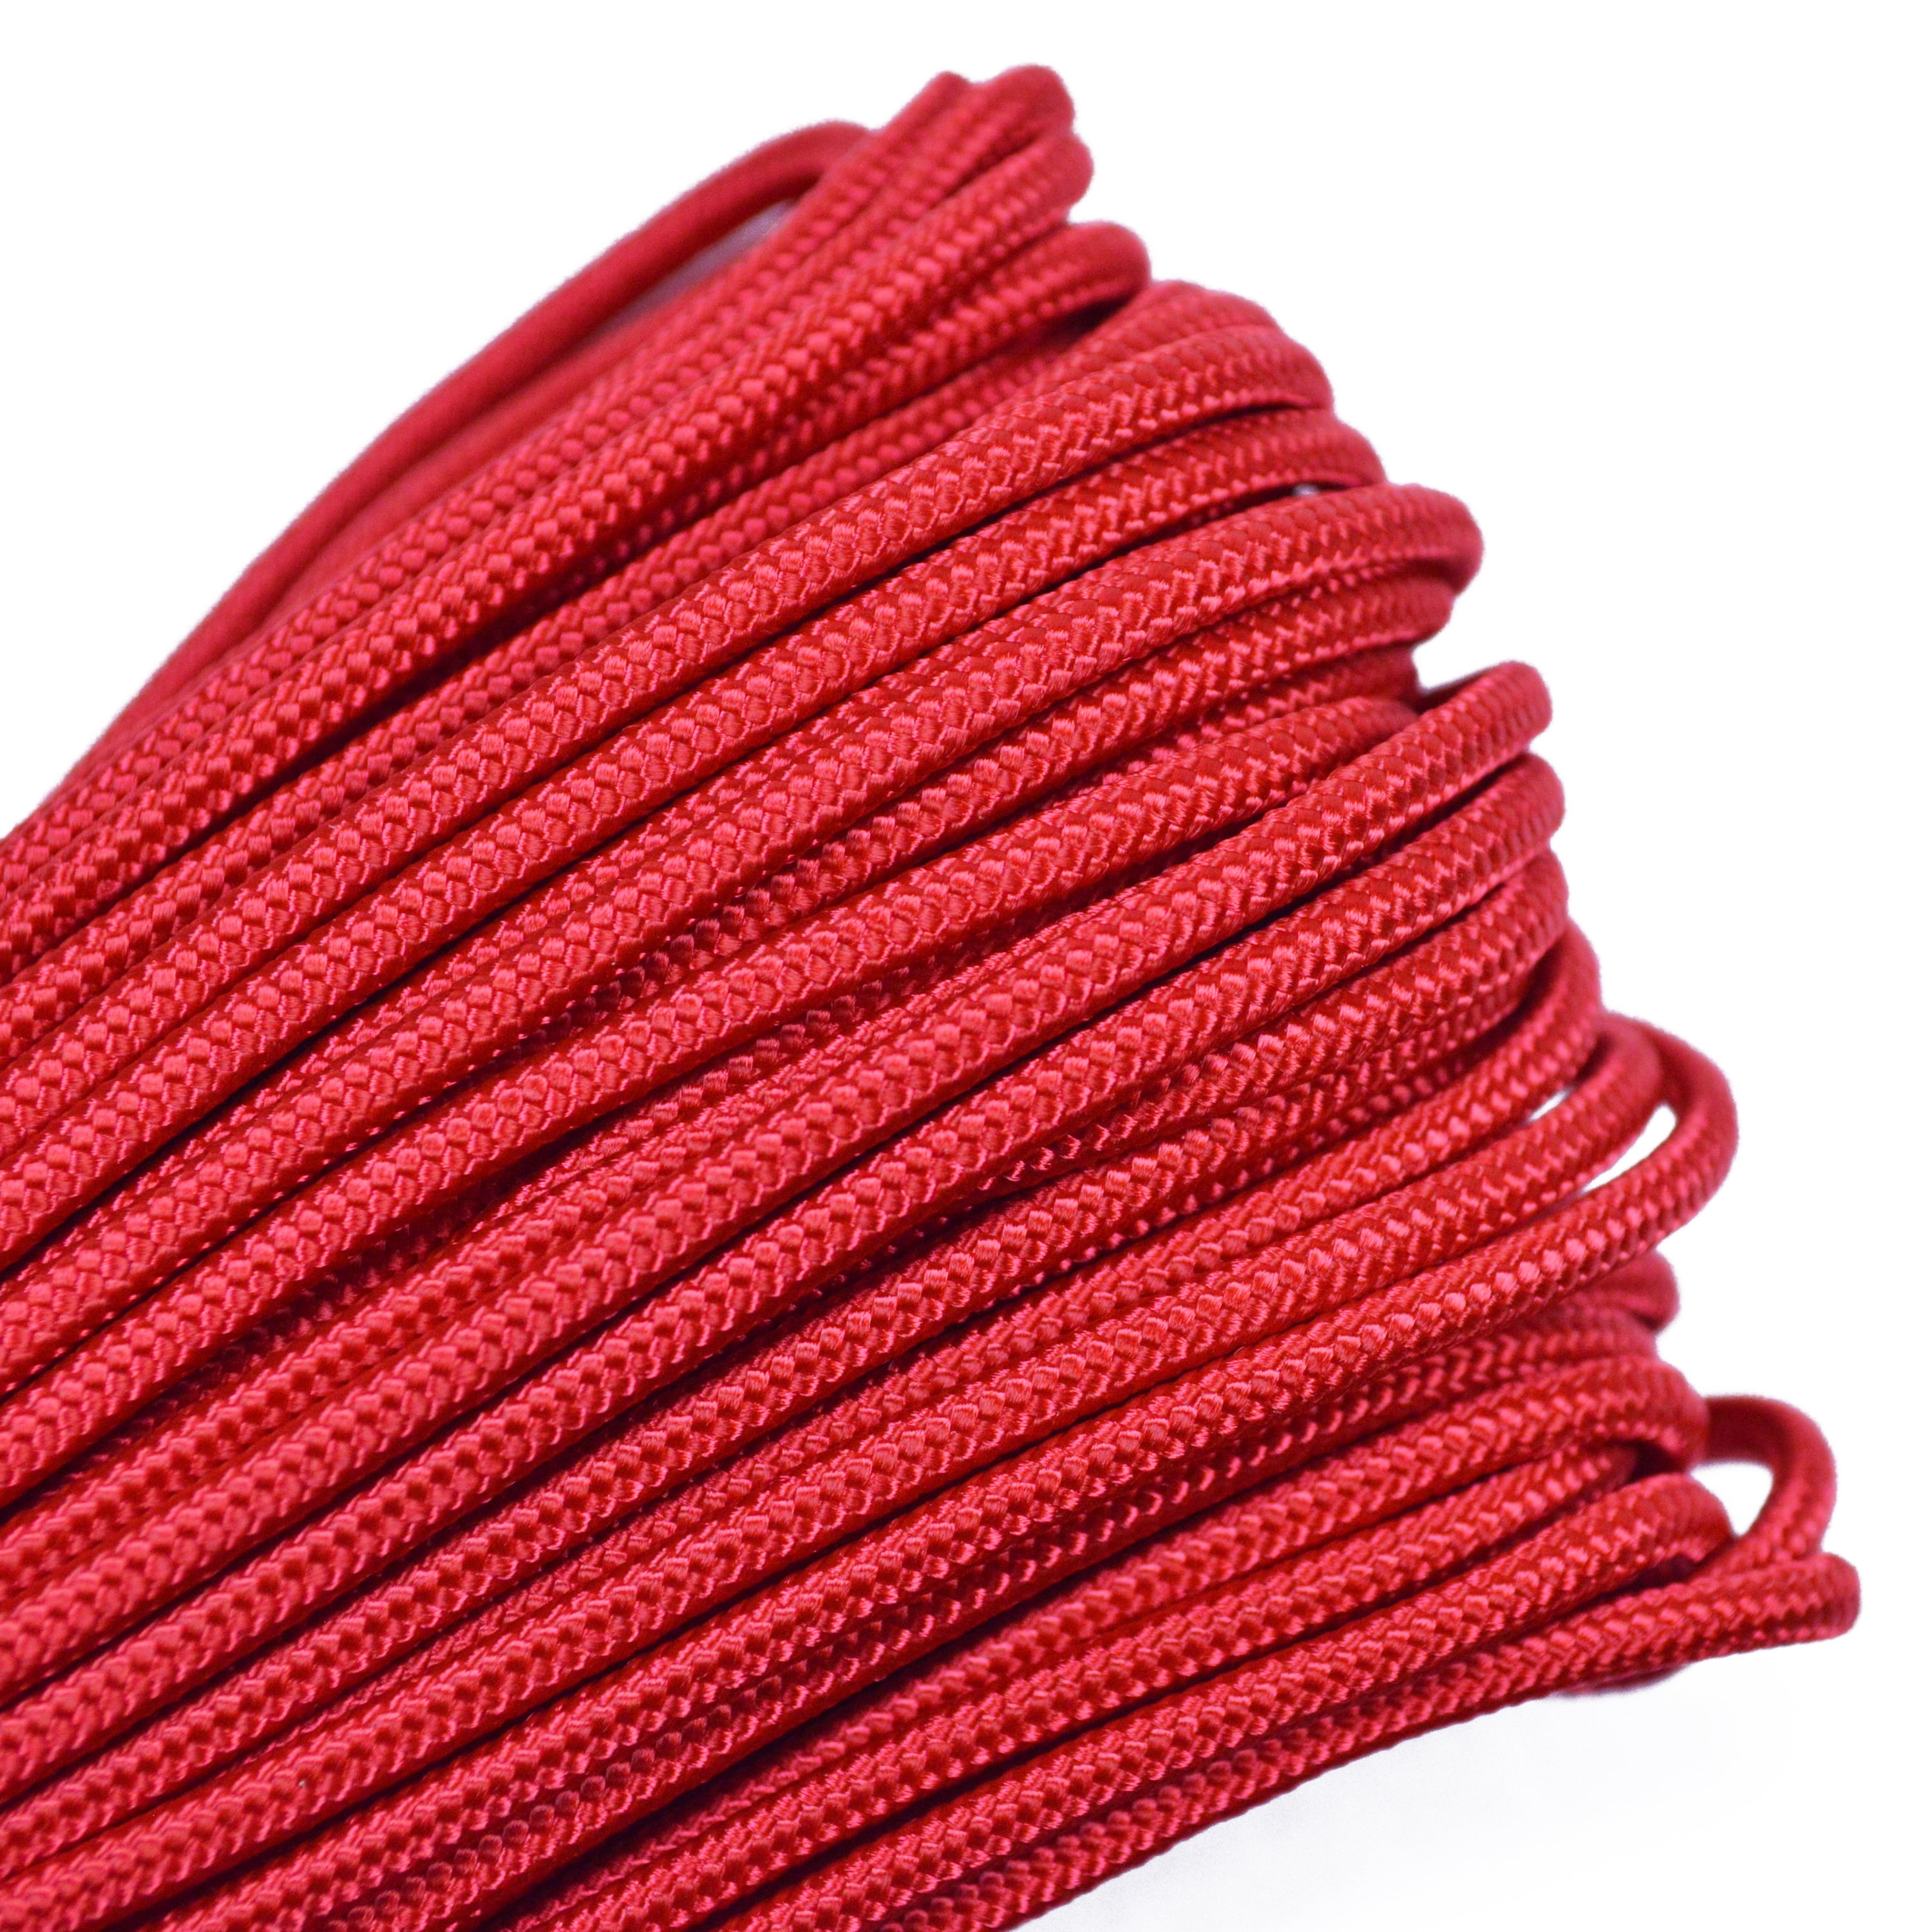 Red 275 Cord 5 Strand Paracord - 100 Feet 